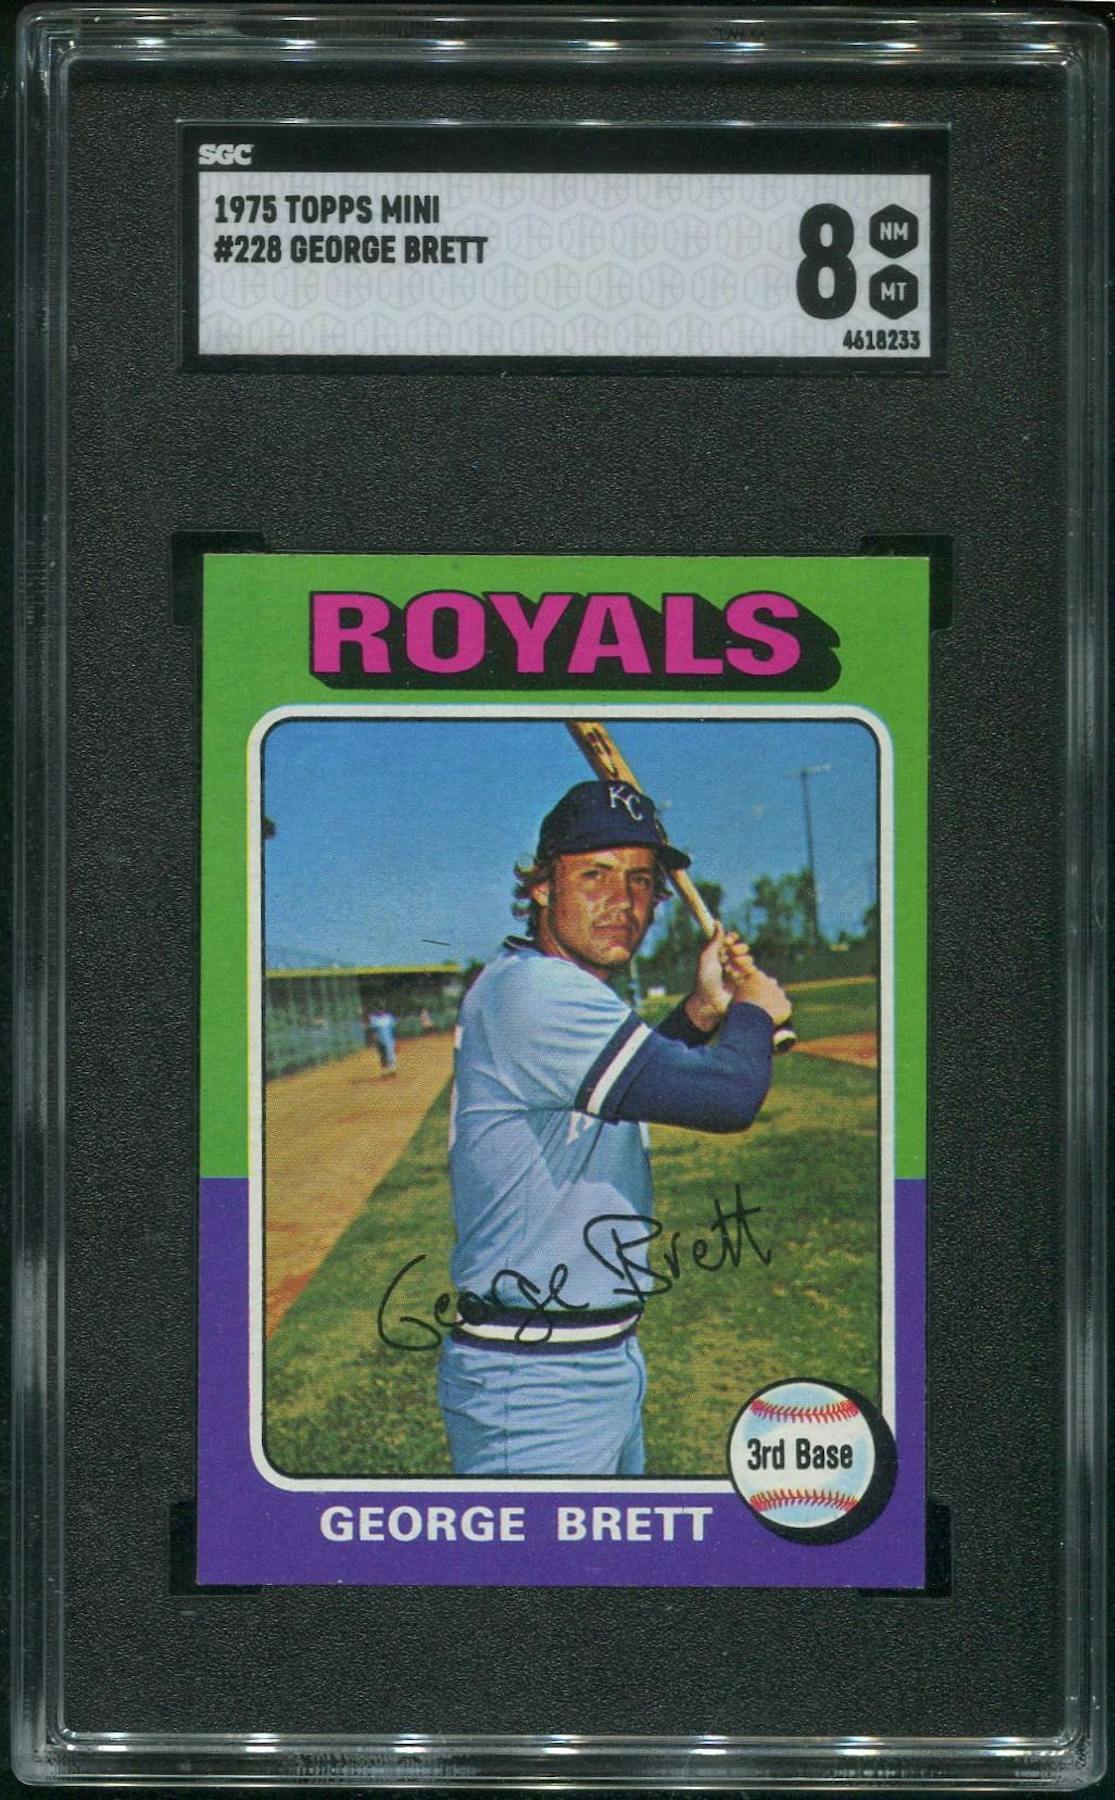 The George Brett Rookie Card and Other Vintage Cards